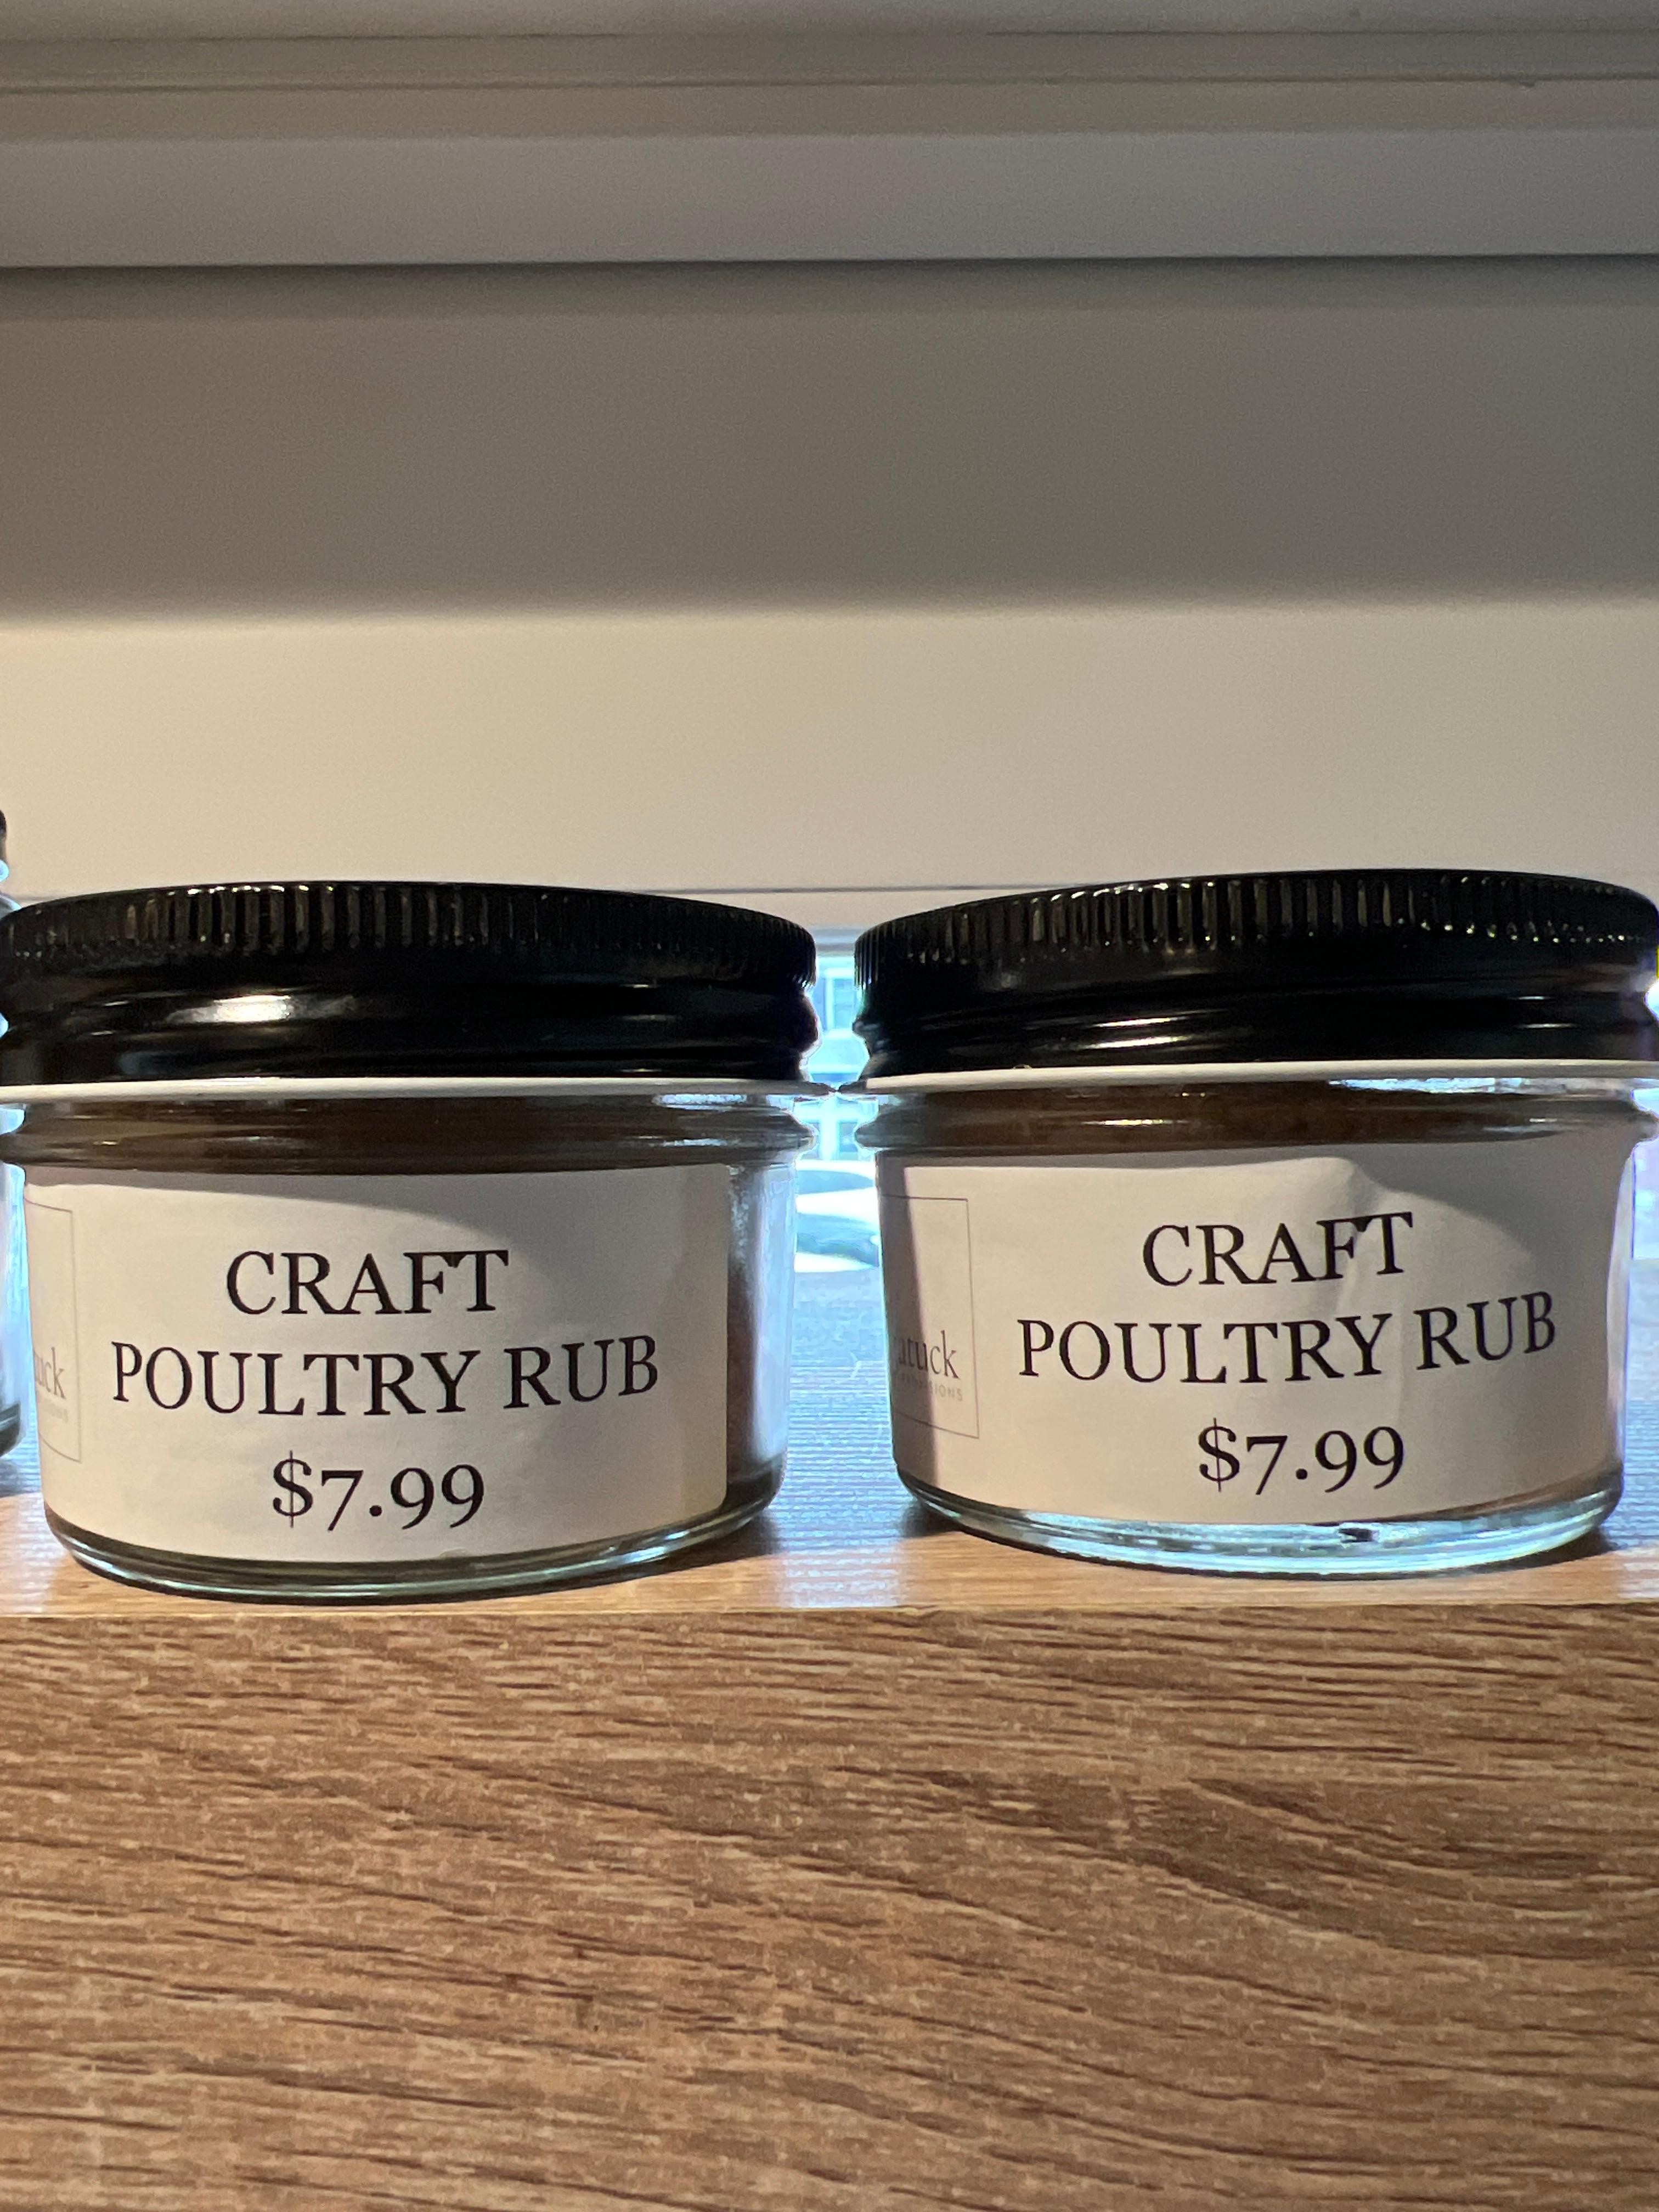 CRAFT POULTRY RUB